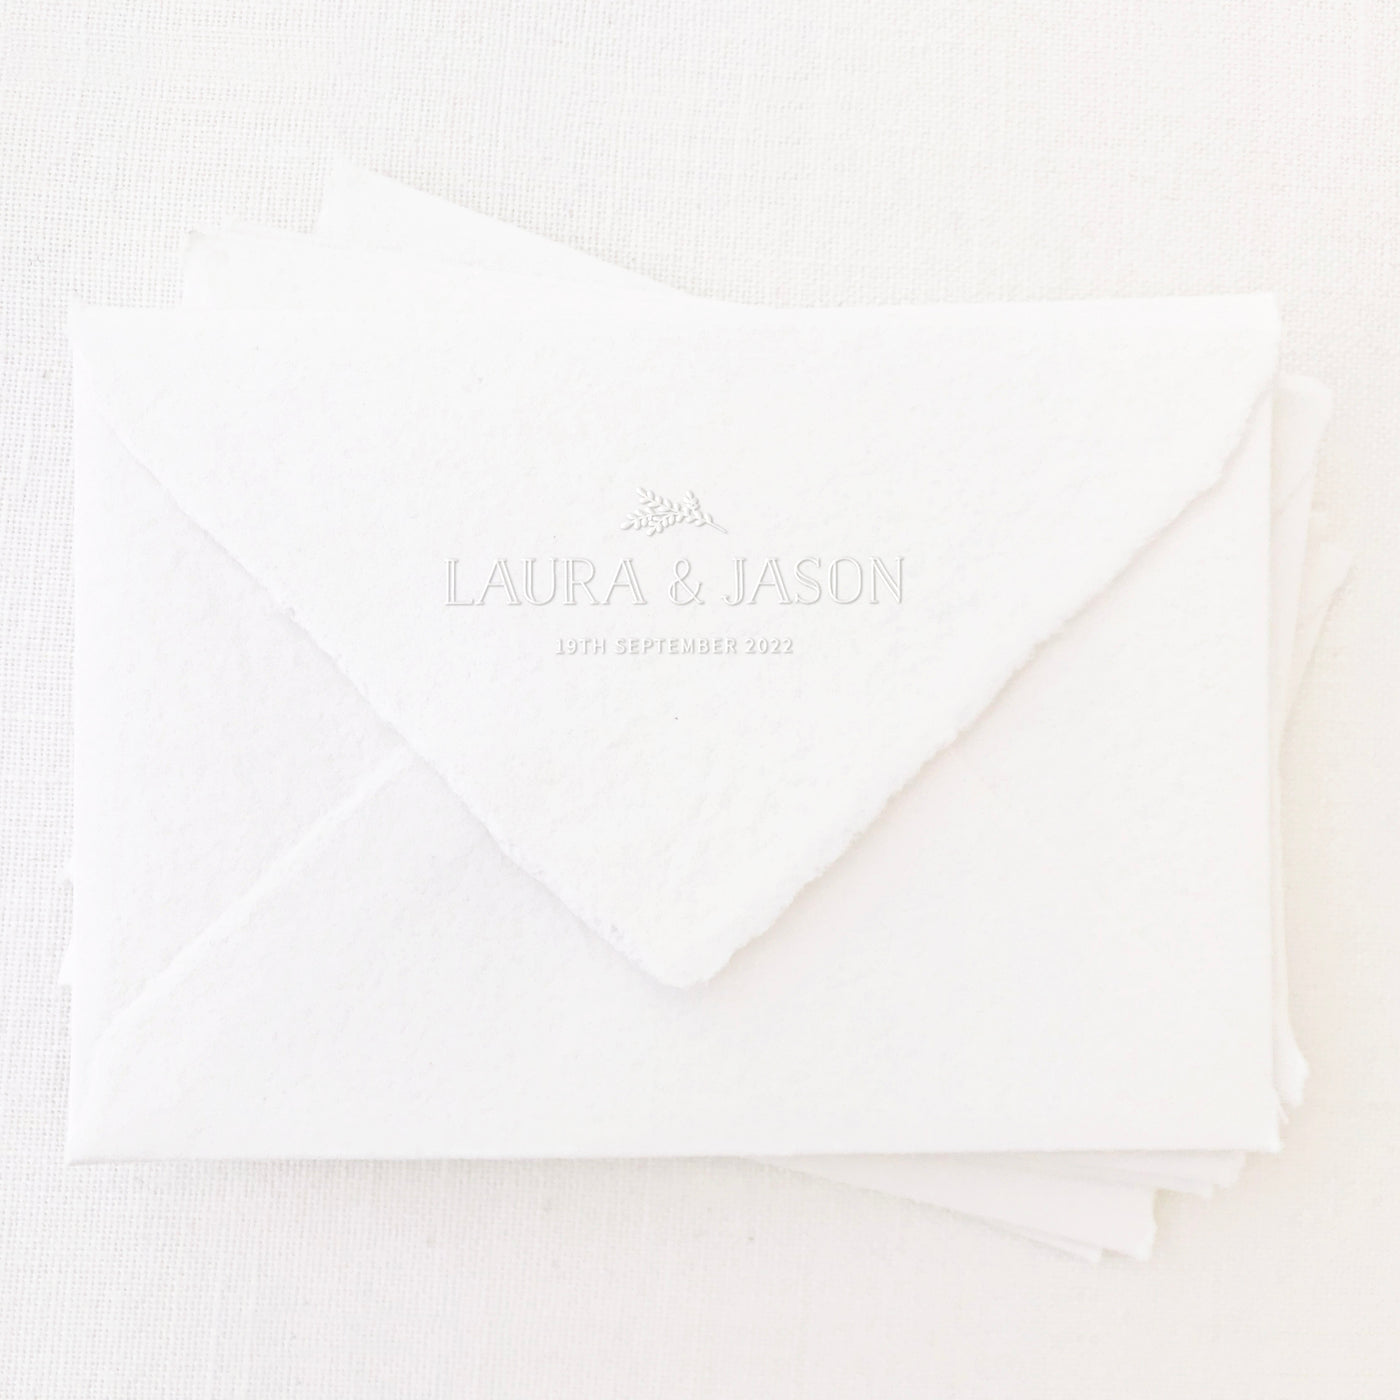 ELEGANT CLASSIC SAVE THE DATE EMBOSSER - EVERLY